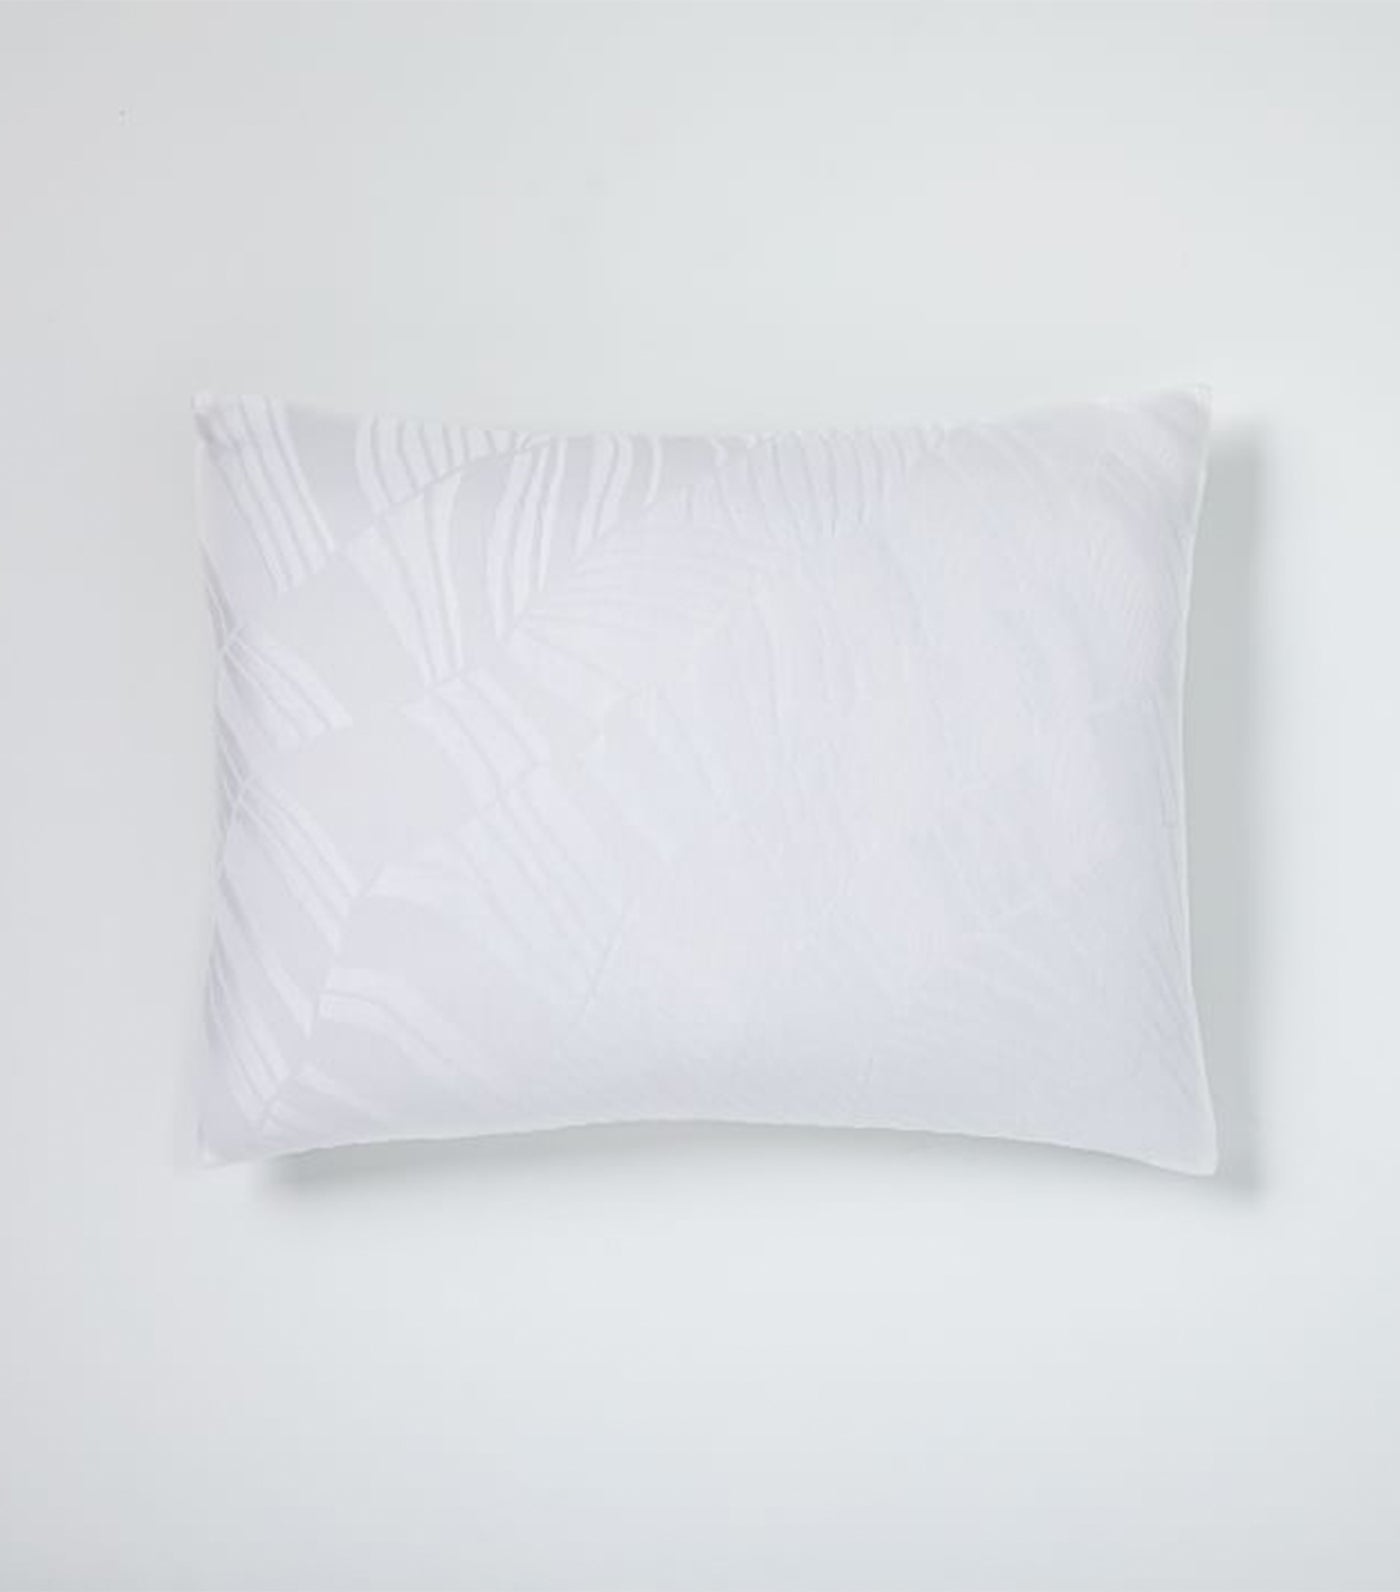 west elm stone white standard sham tencel™ and cotton matelasse rippled duvet cover and shams collection